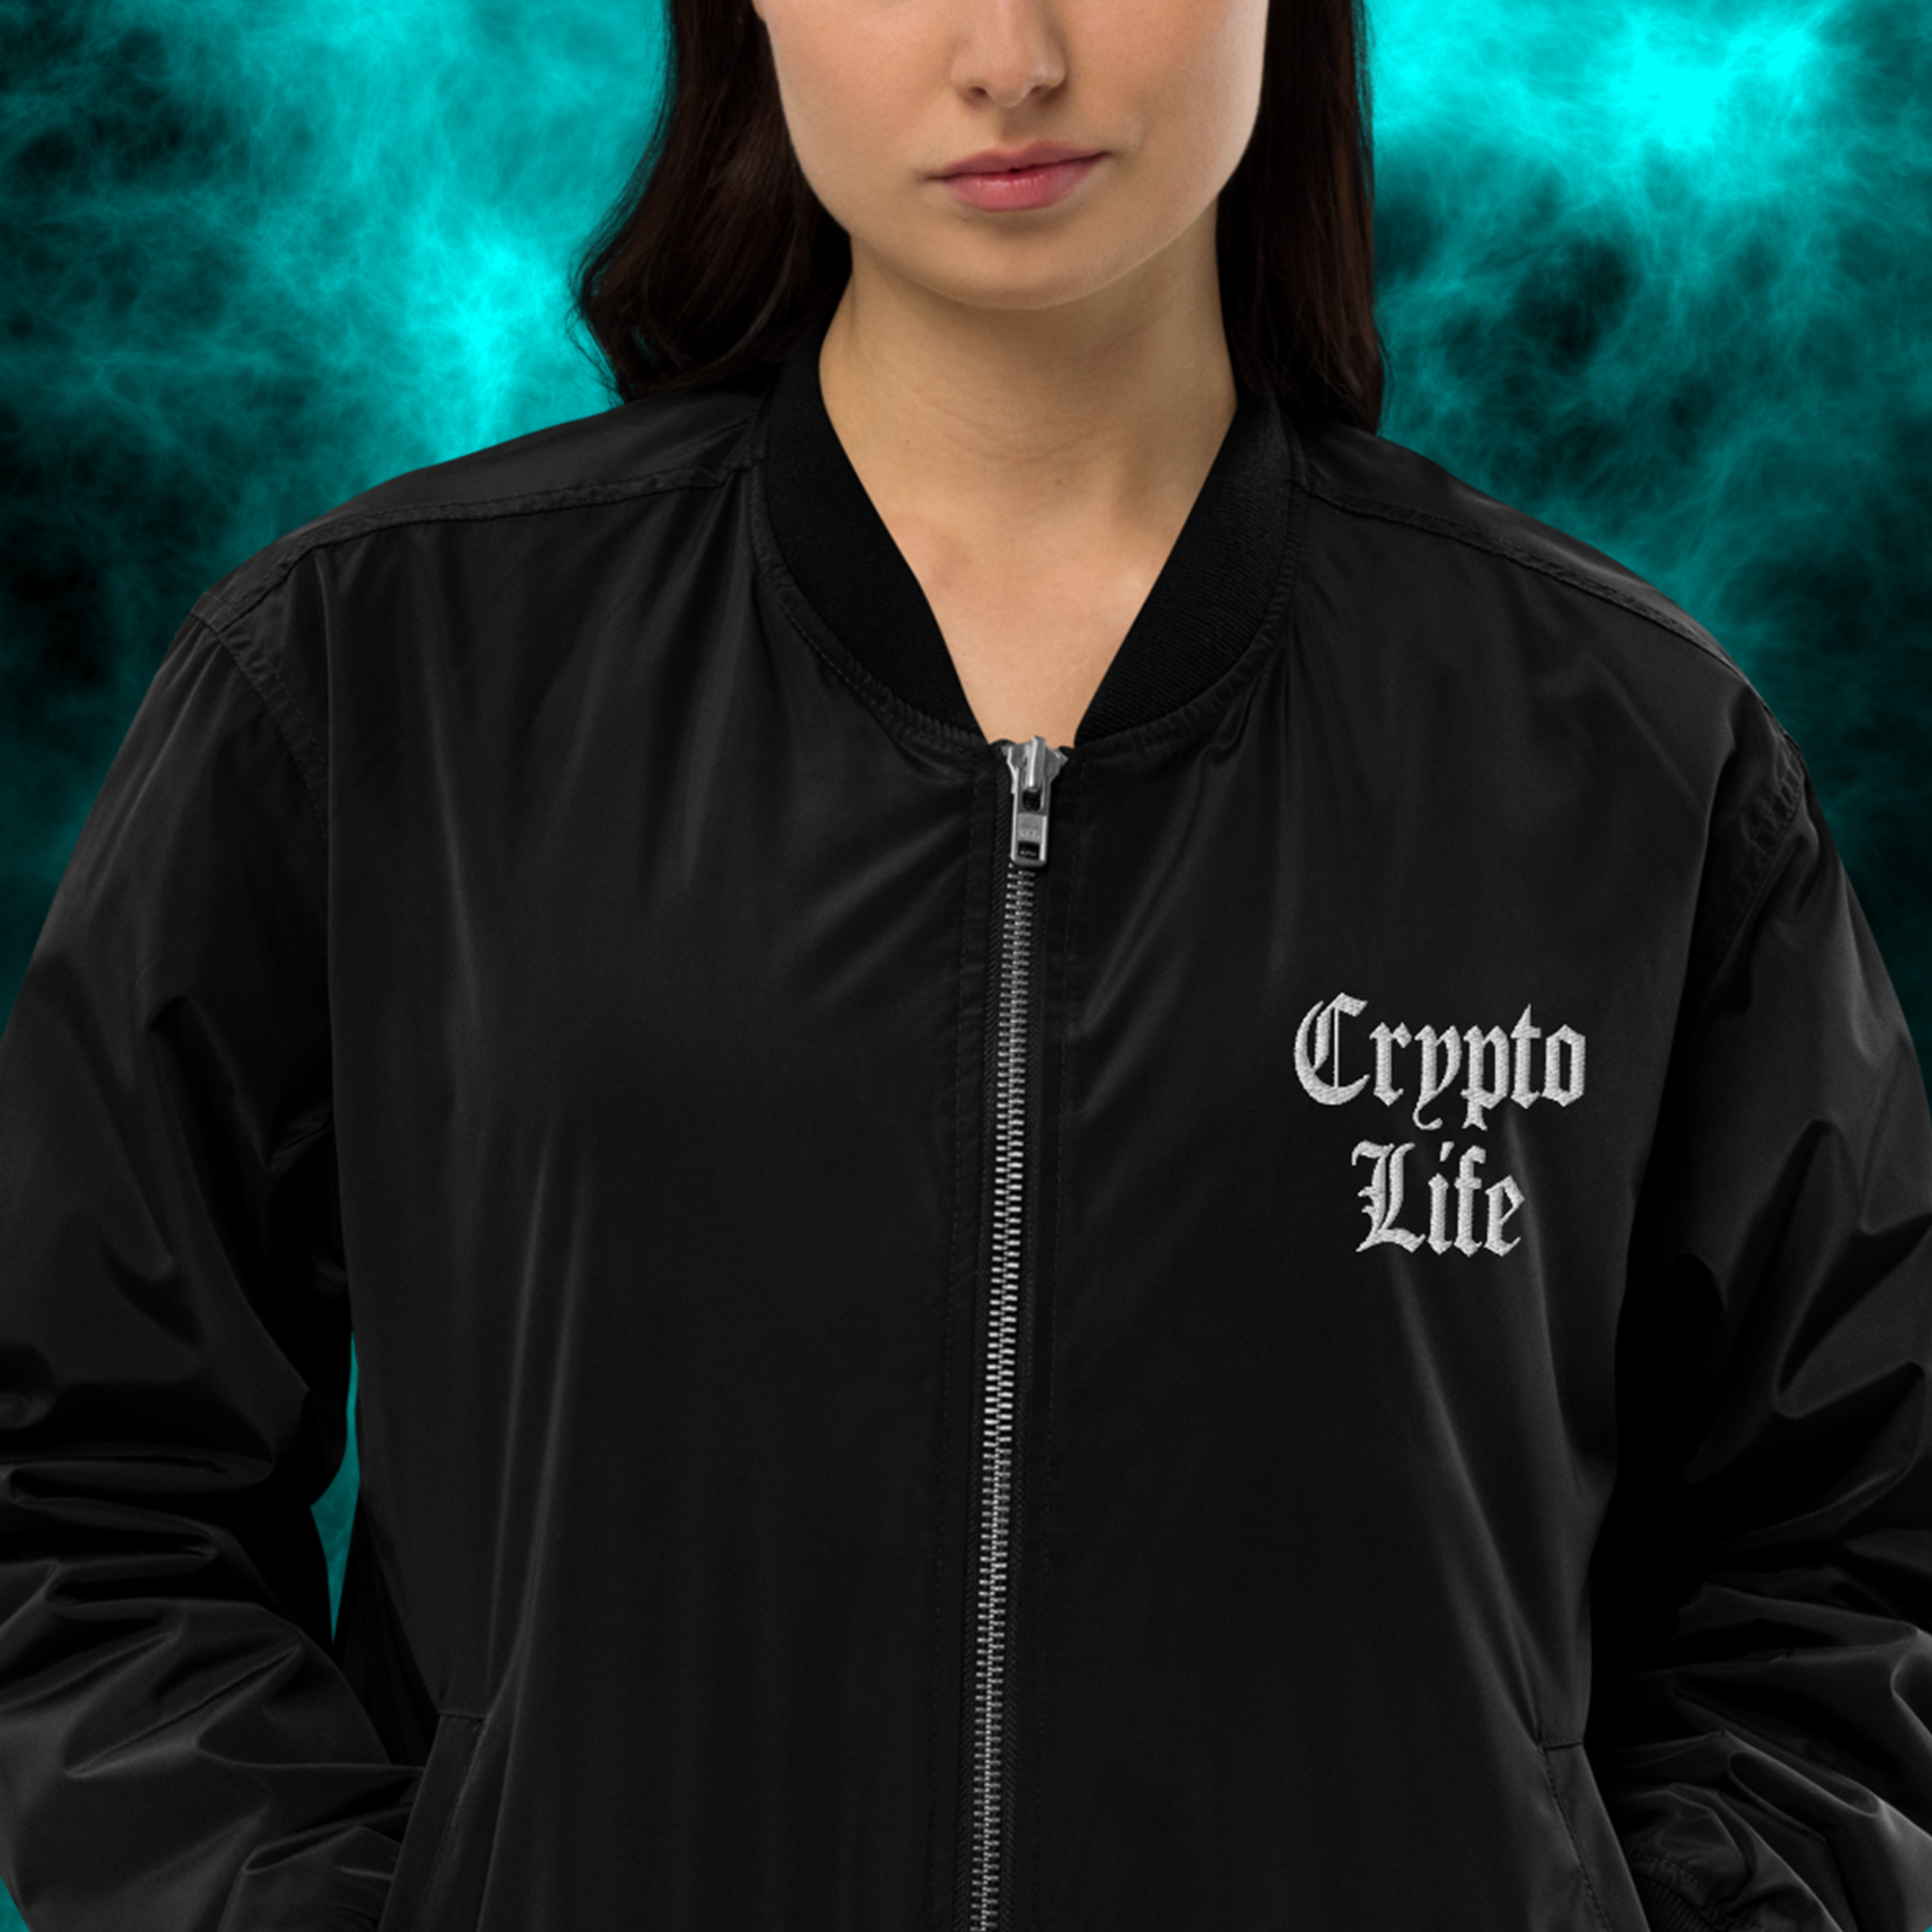 Crypto Merchandise - Crypto Life Bomber Jacket worn by female model. Front view.